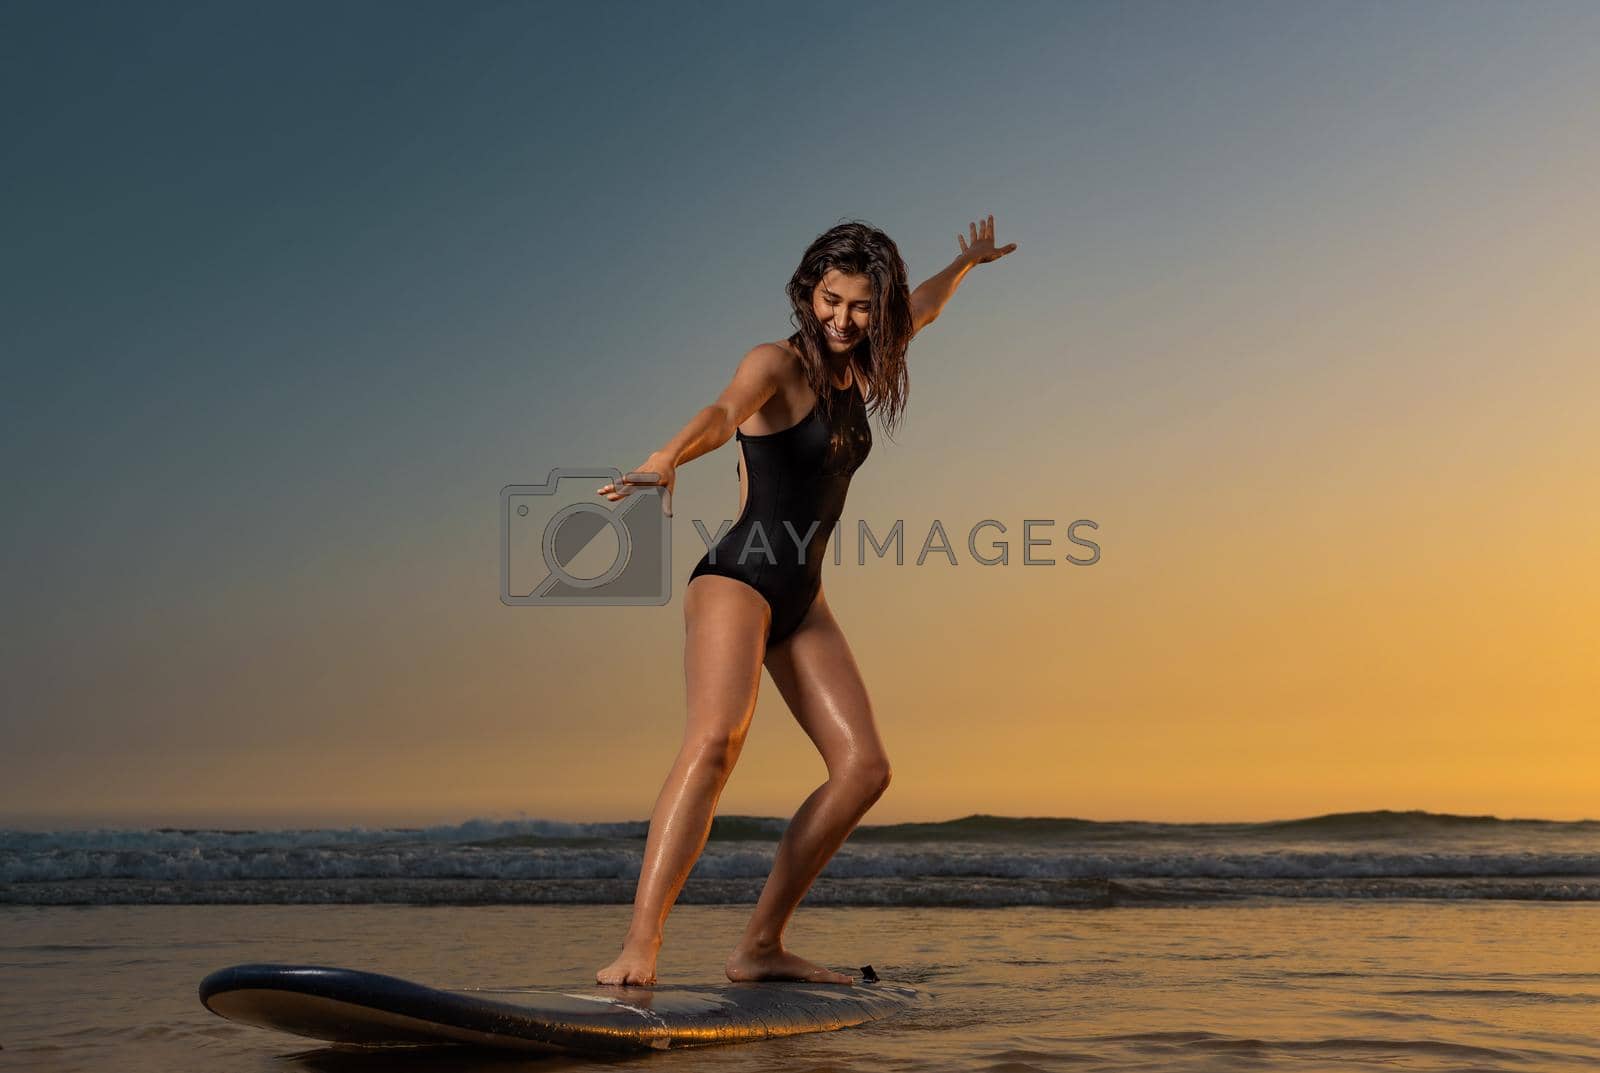 Royalty free image of Surfing training. Surf lessons. Girl with surf board ready to surfing. Woman surfer on the surfboard on a beach at sunset. by MikeOrlov